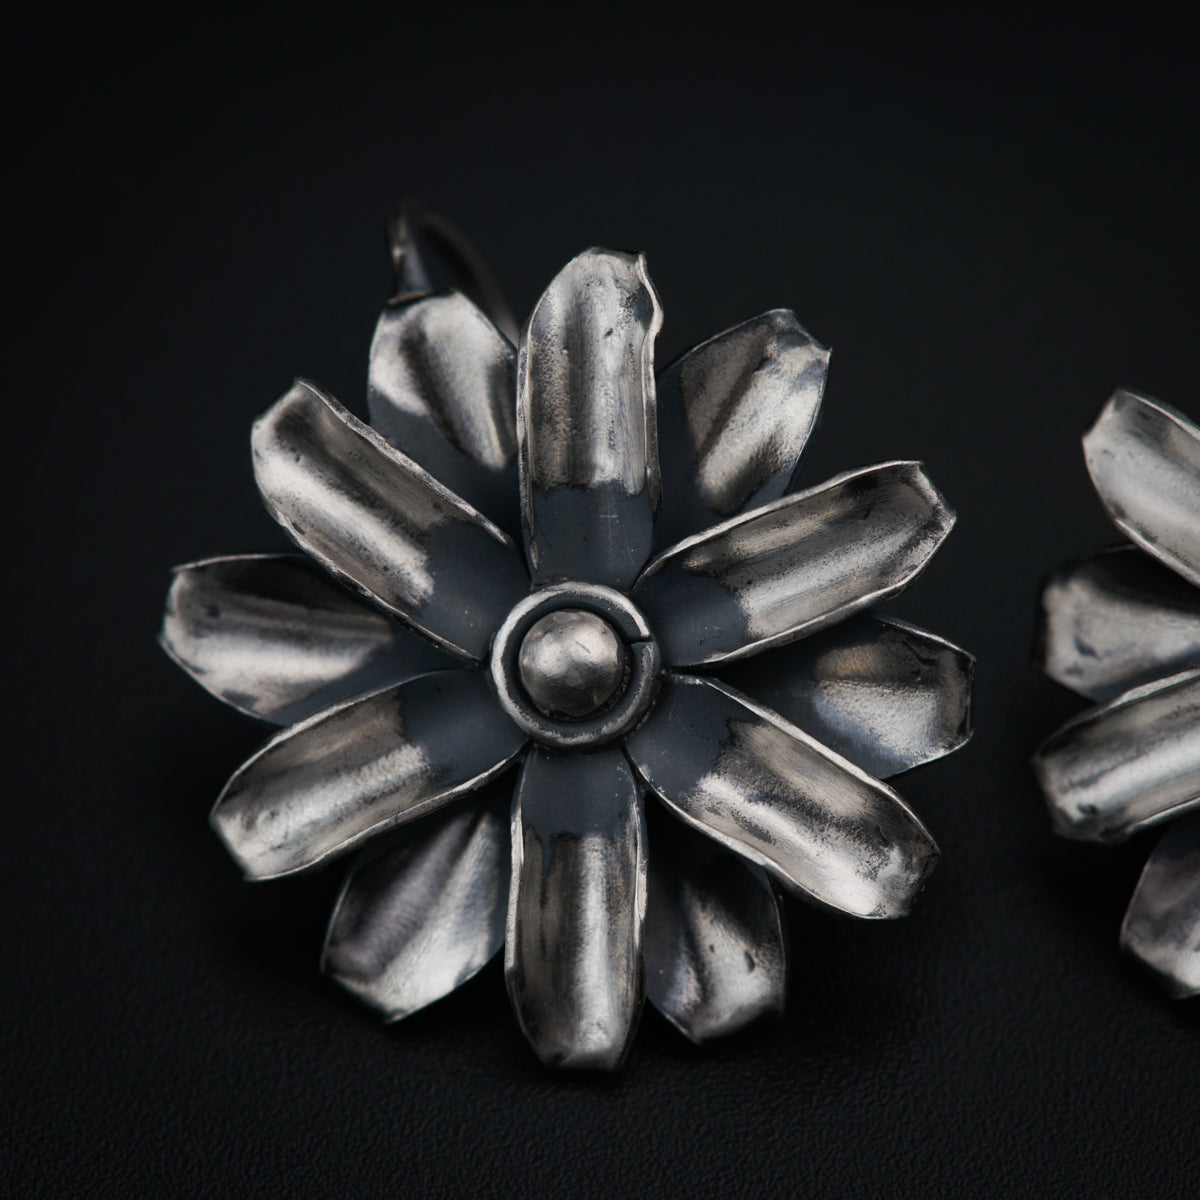 a pair of metal flowers on a black surface